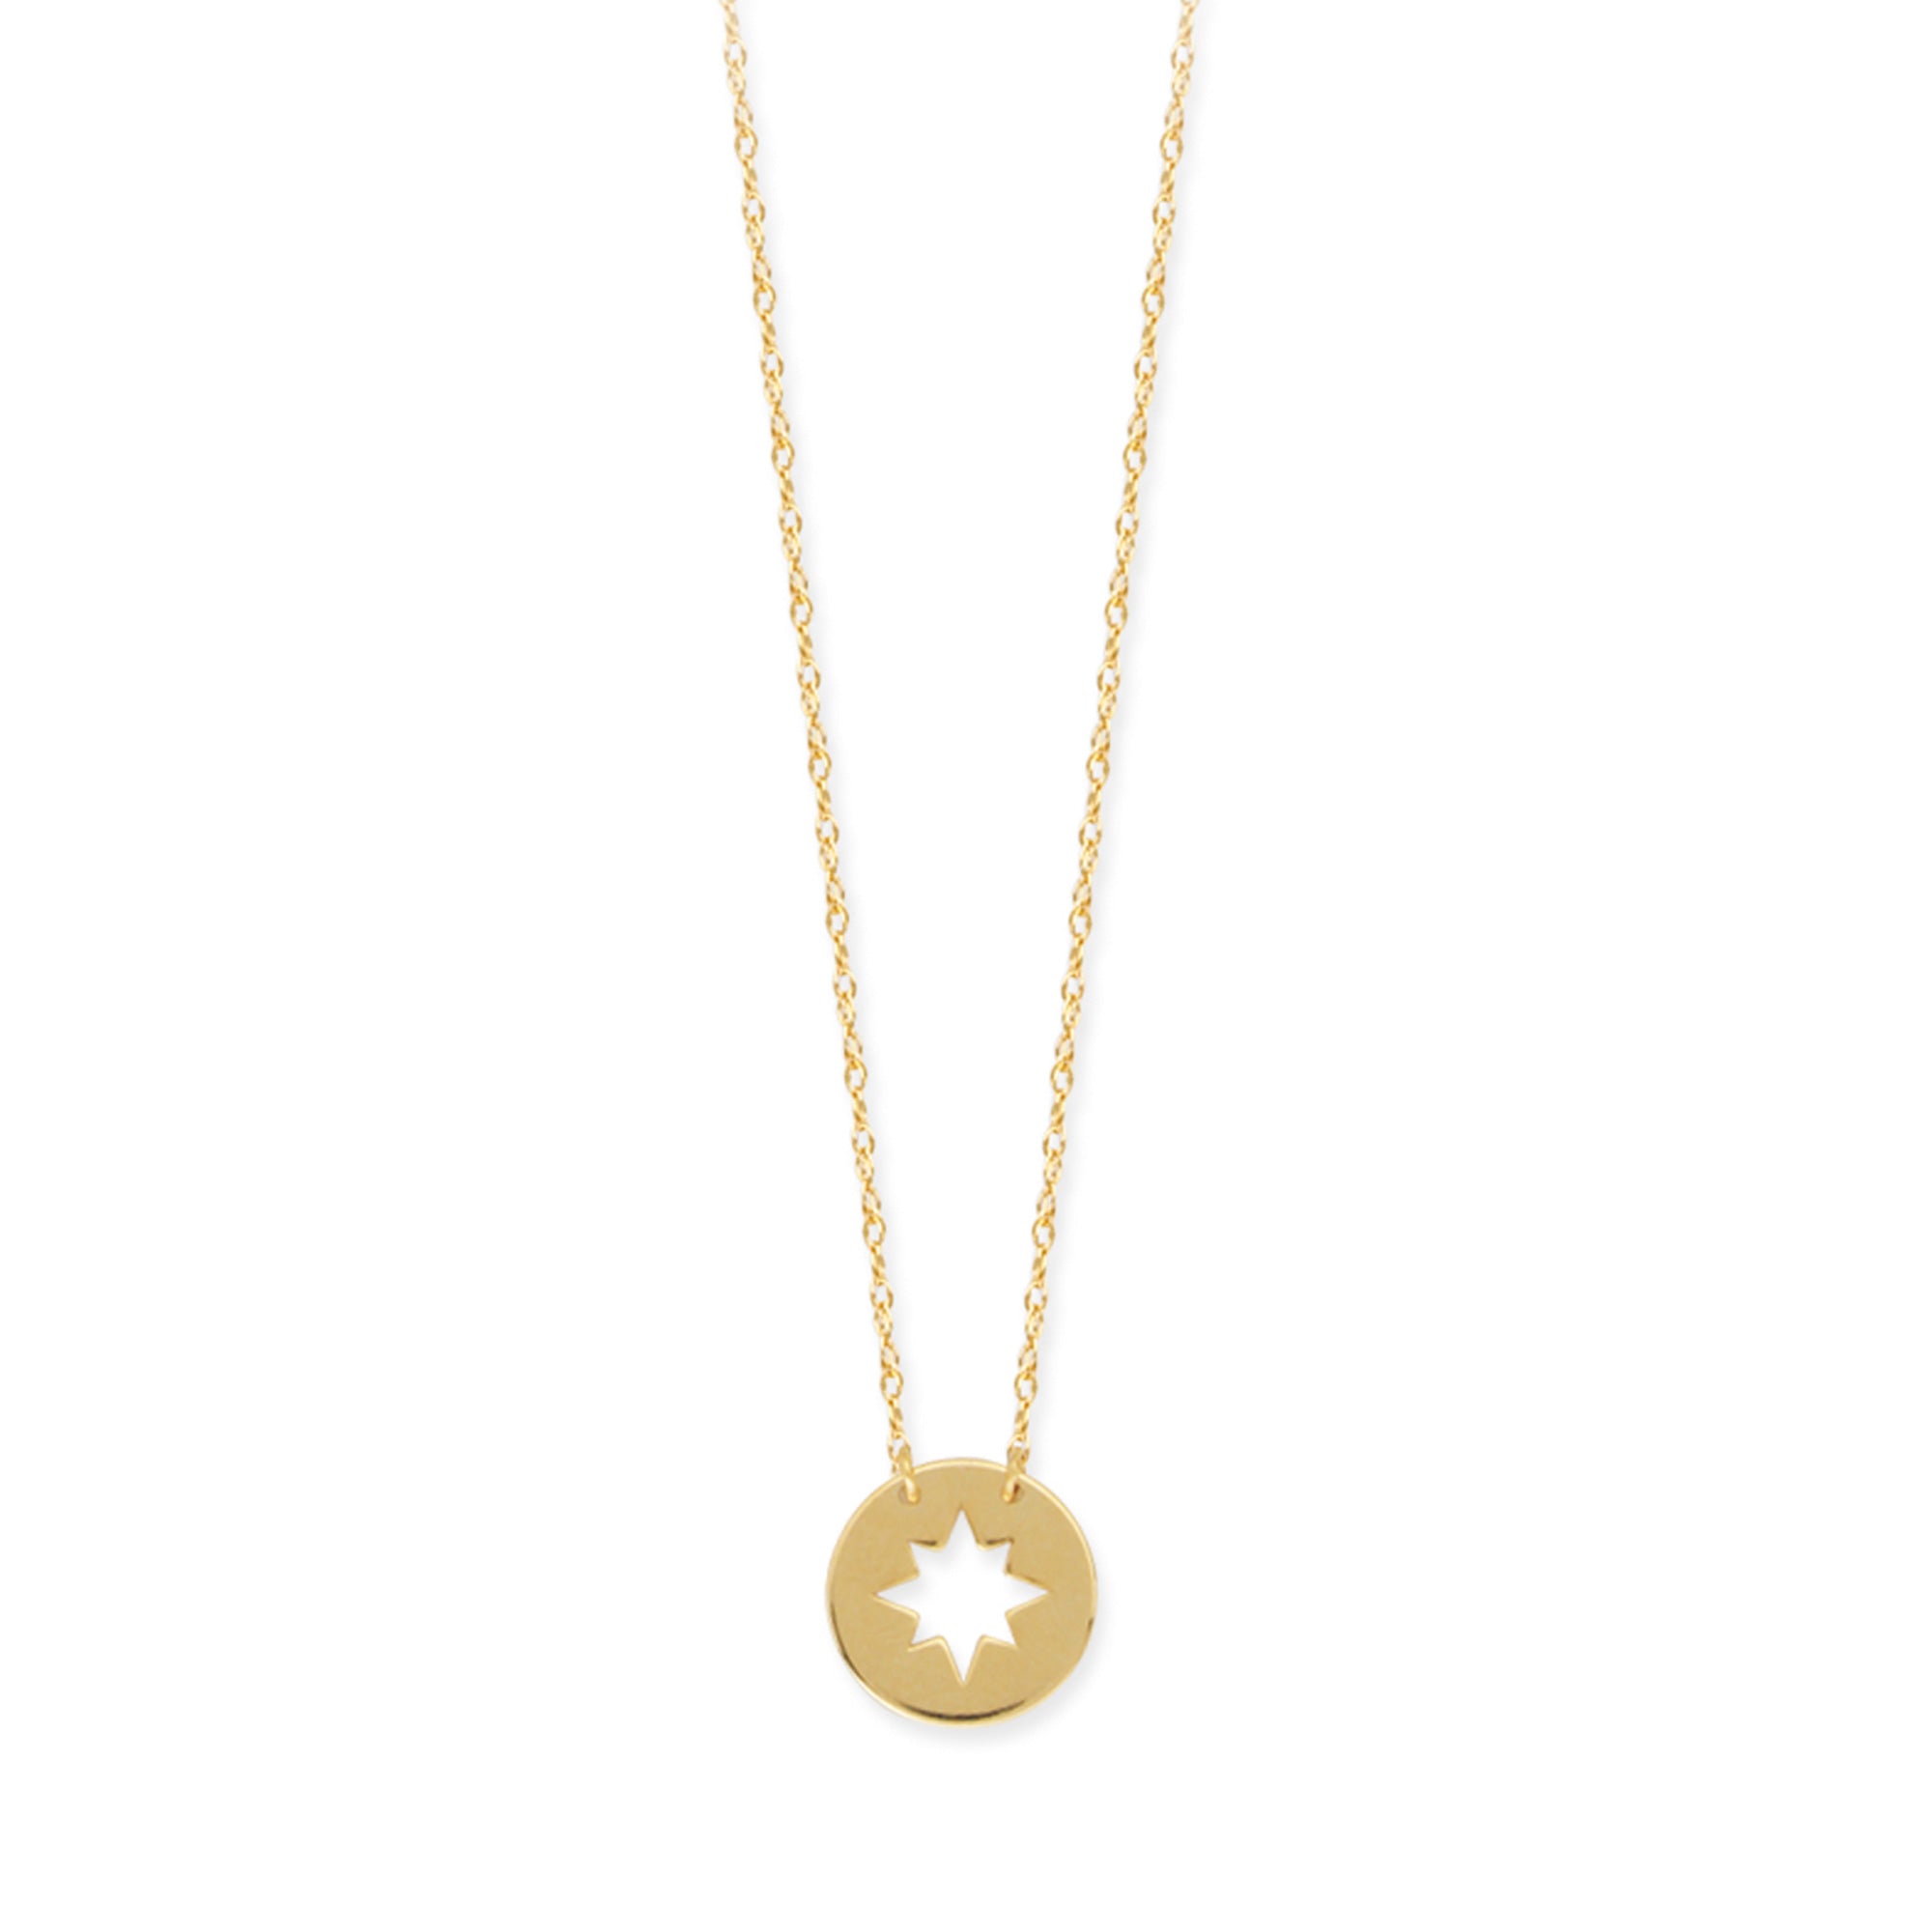 14K Yellow Gold Mini Northern Star Pendant Necklace, 16" To 18" Adjustable fine designer jewelry for men and women